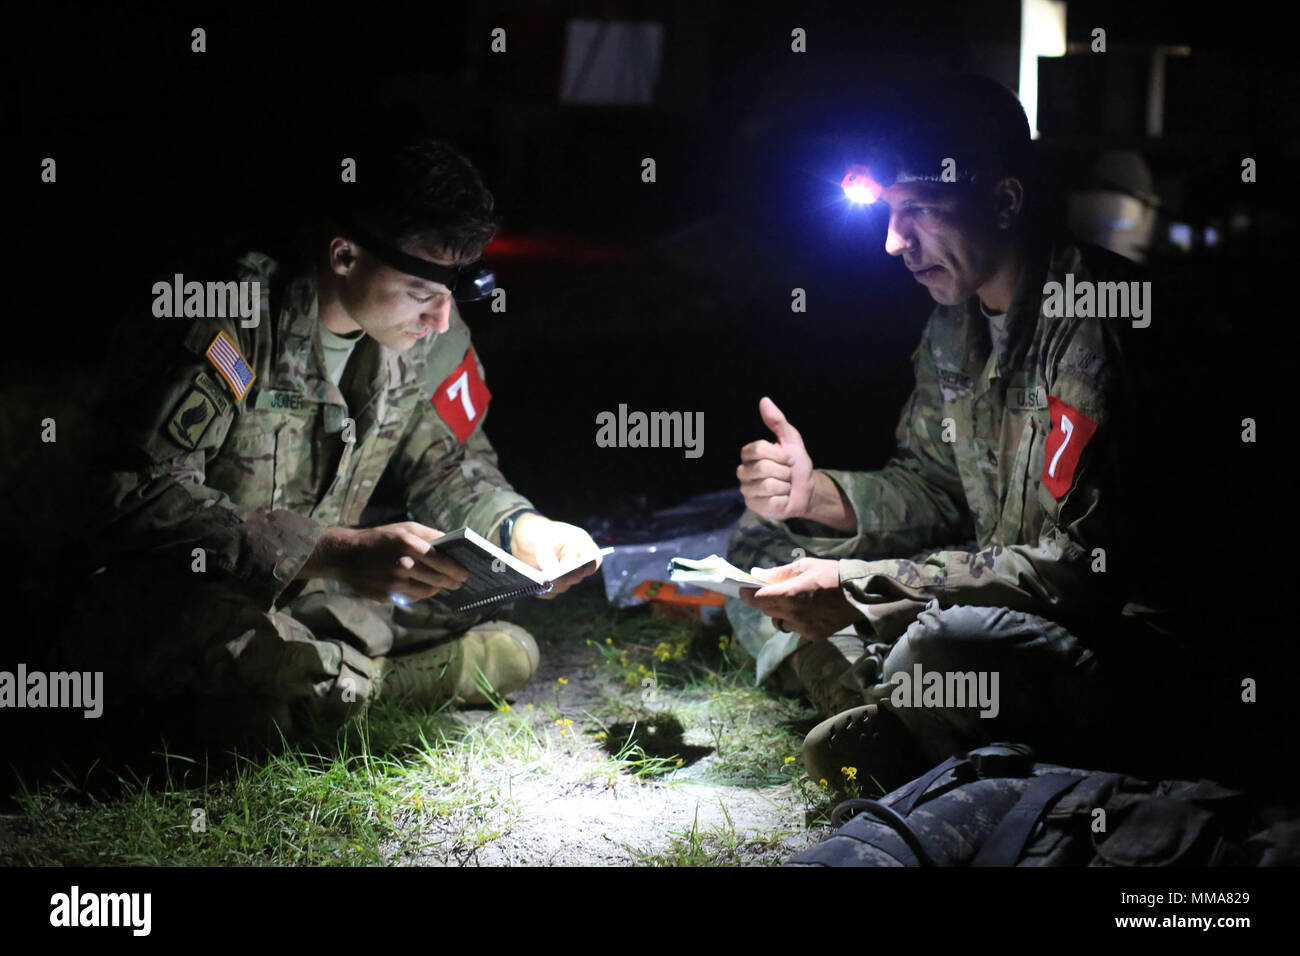 U.S. Army Staff Sgt. Eric Jonier and Staff Sgt. Mkakauet Generauax, both assigned to the Lyster Army Community Hospital, look over notes before the simulated Mass Casualty Event during the 2017 Best Medic Competition at Fort Bragg, N.C., Sep. 18-21, 2017. The competition tested the physical and mental toughness, as well as the technical competence, of each medic to identify the team moving forward to represent the region at the next level of the competition.  (U.S. Army photo by Spc. Paris Maxey) Stock Photo